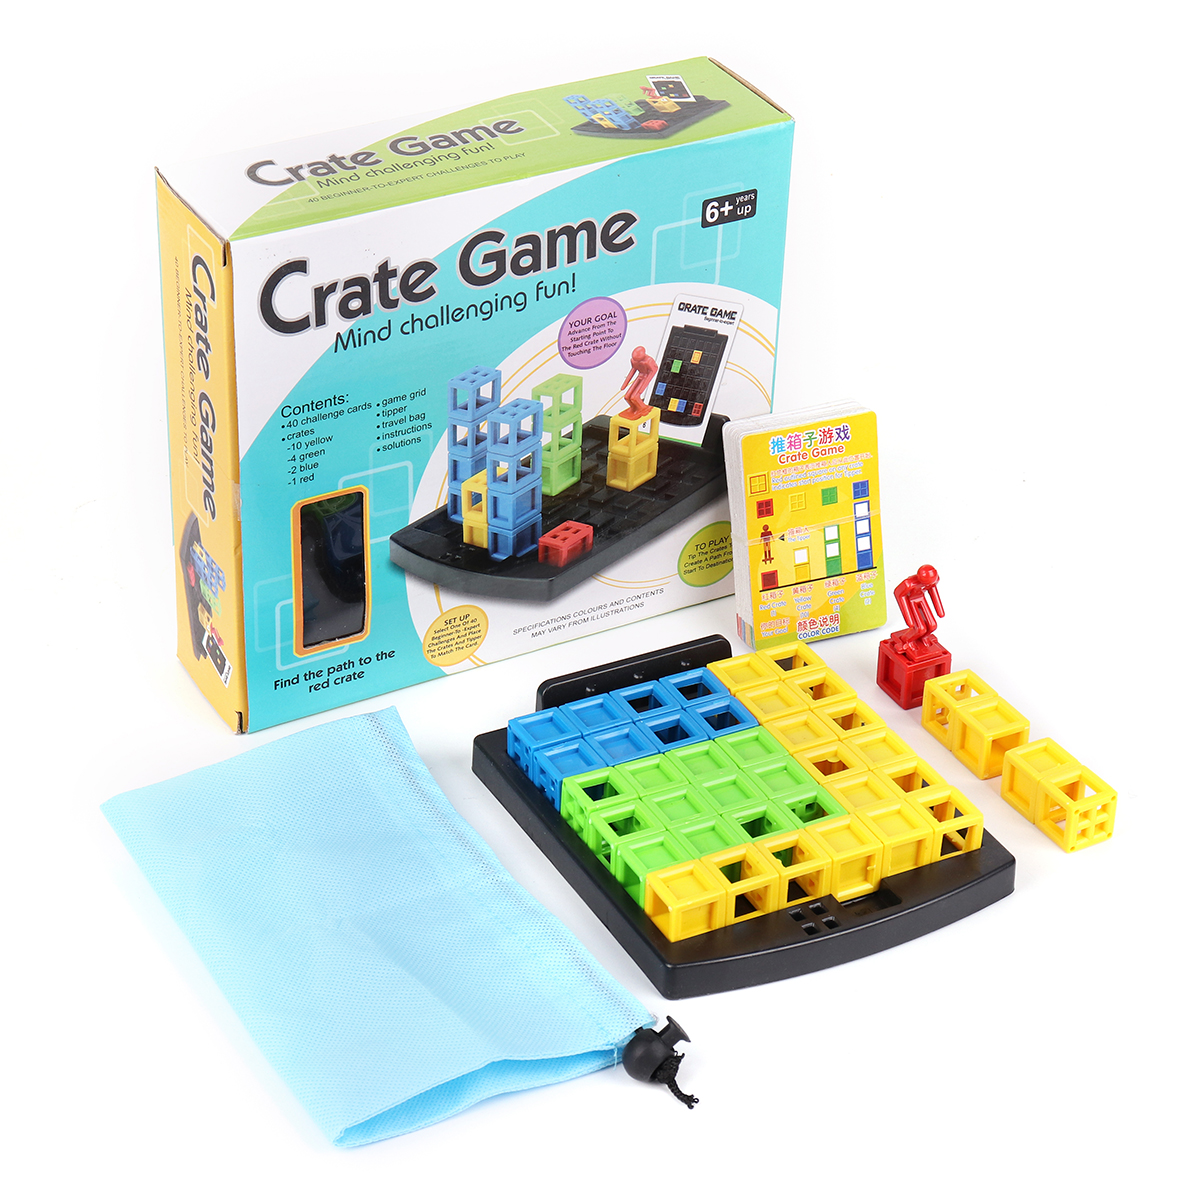 Jumping-Box-Childrens-Educational-Toys-Parent-Child-Table-Games-1323877